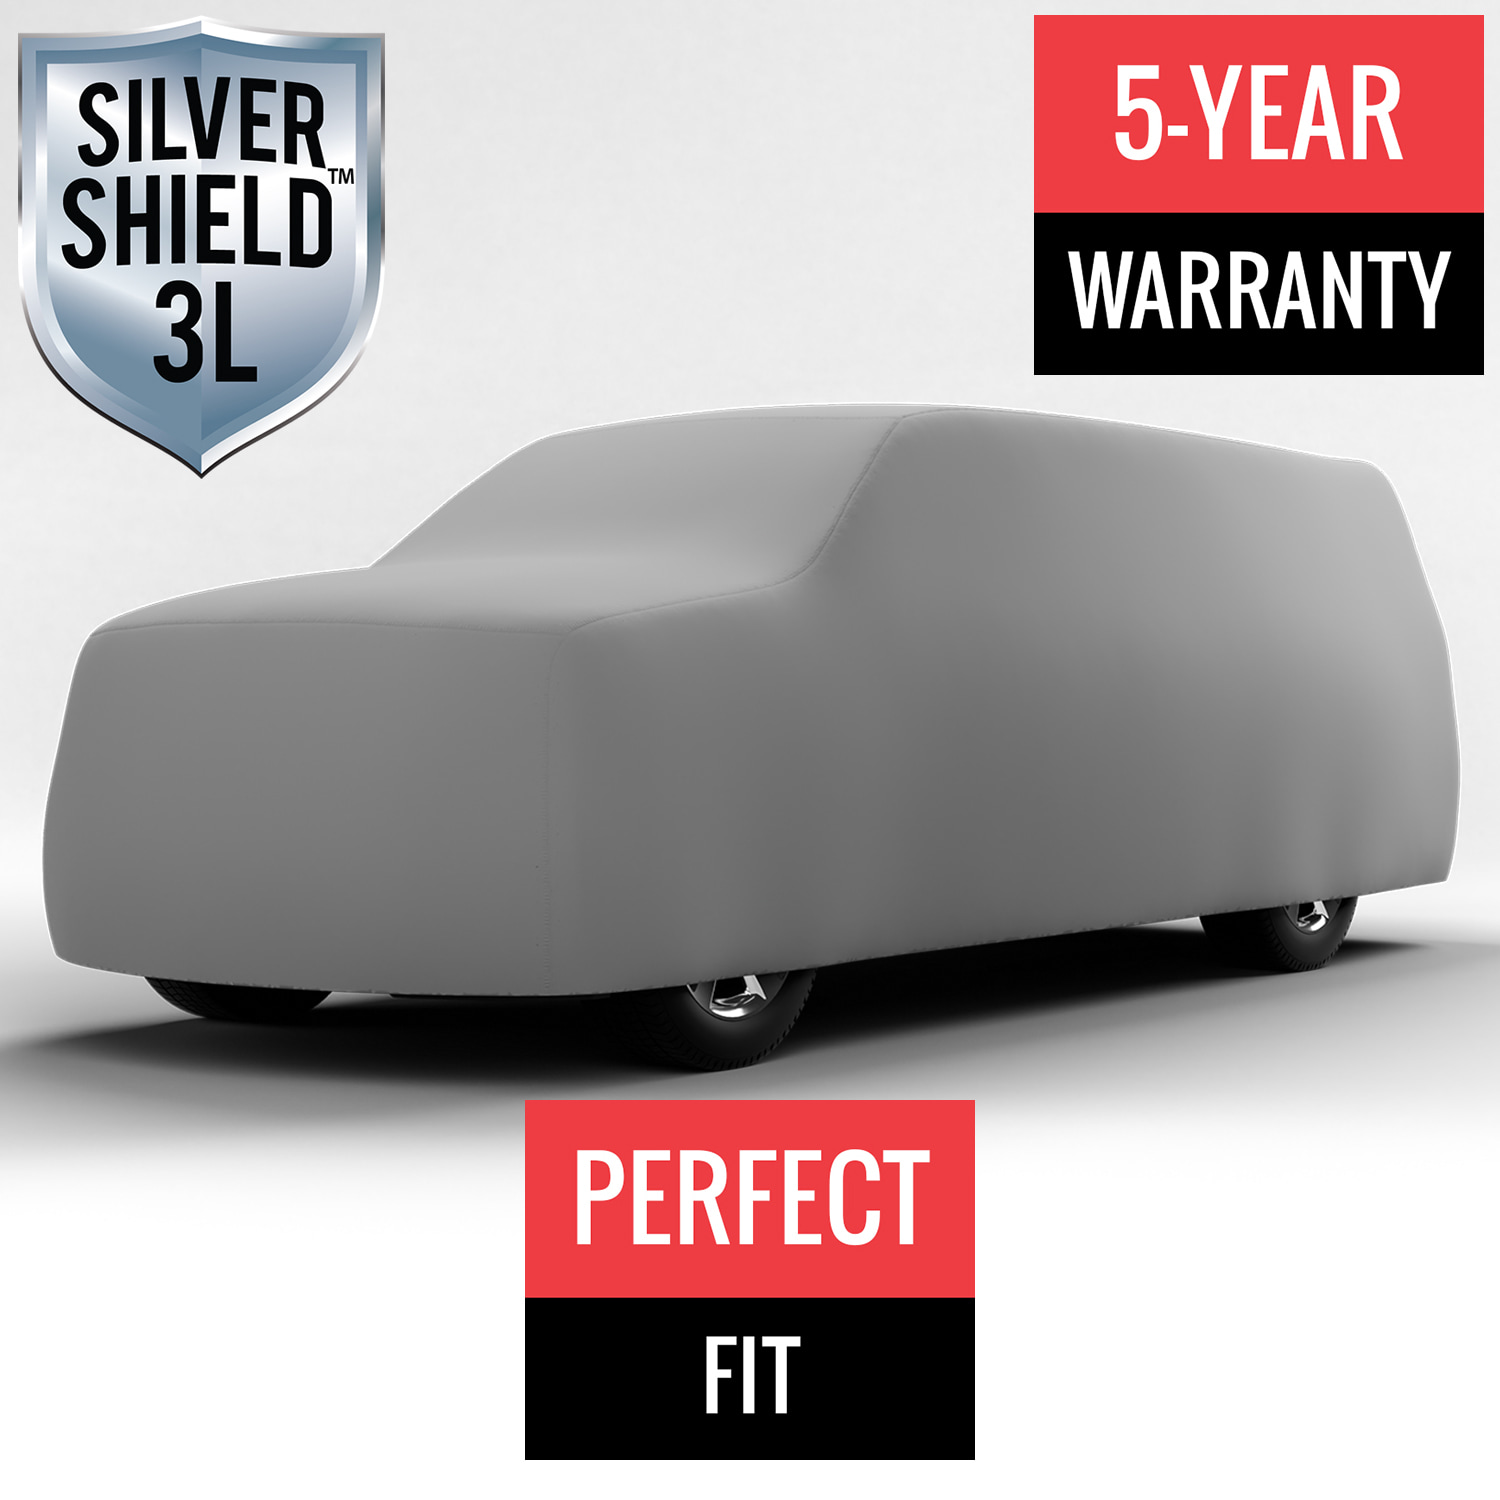 Silver Shield 3L - Car Cover for Dodge Ram 1500 SRT-10 2006 Quad Cab Pickup 6.5 Feet Bed with Camper Shell